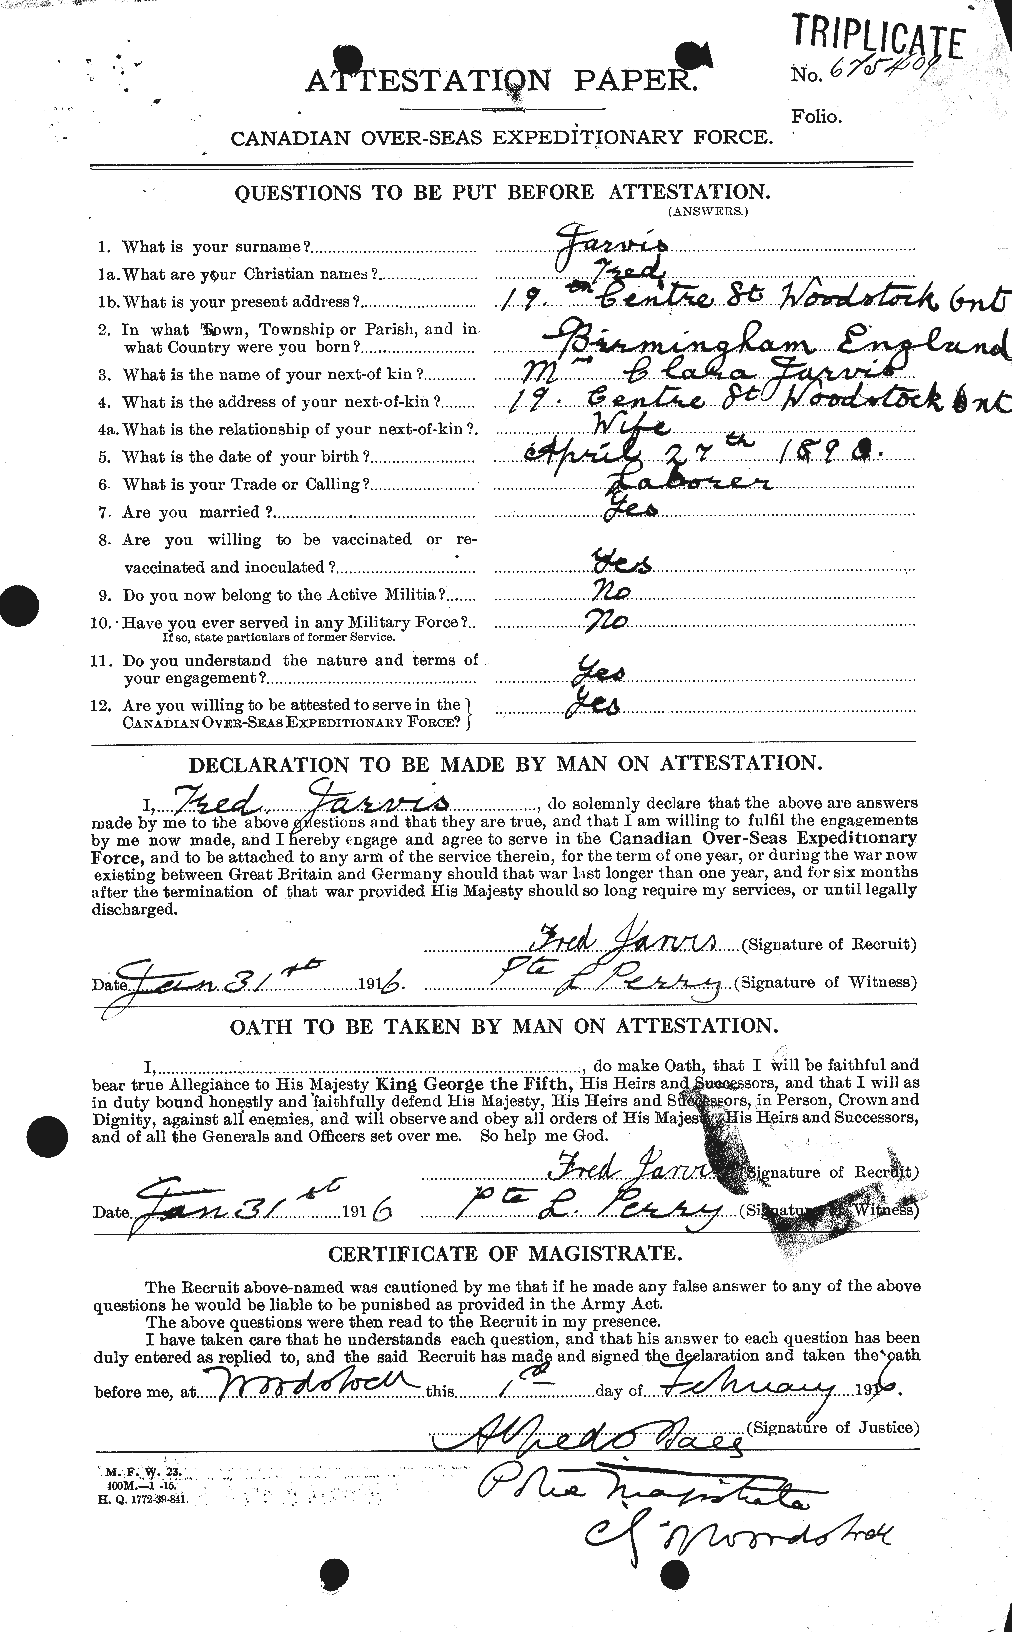 Personnel Records of the First World War - CEF 414690a